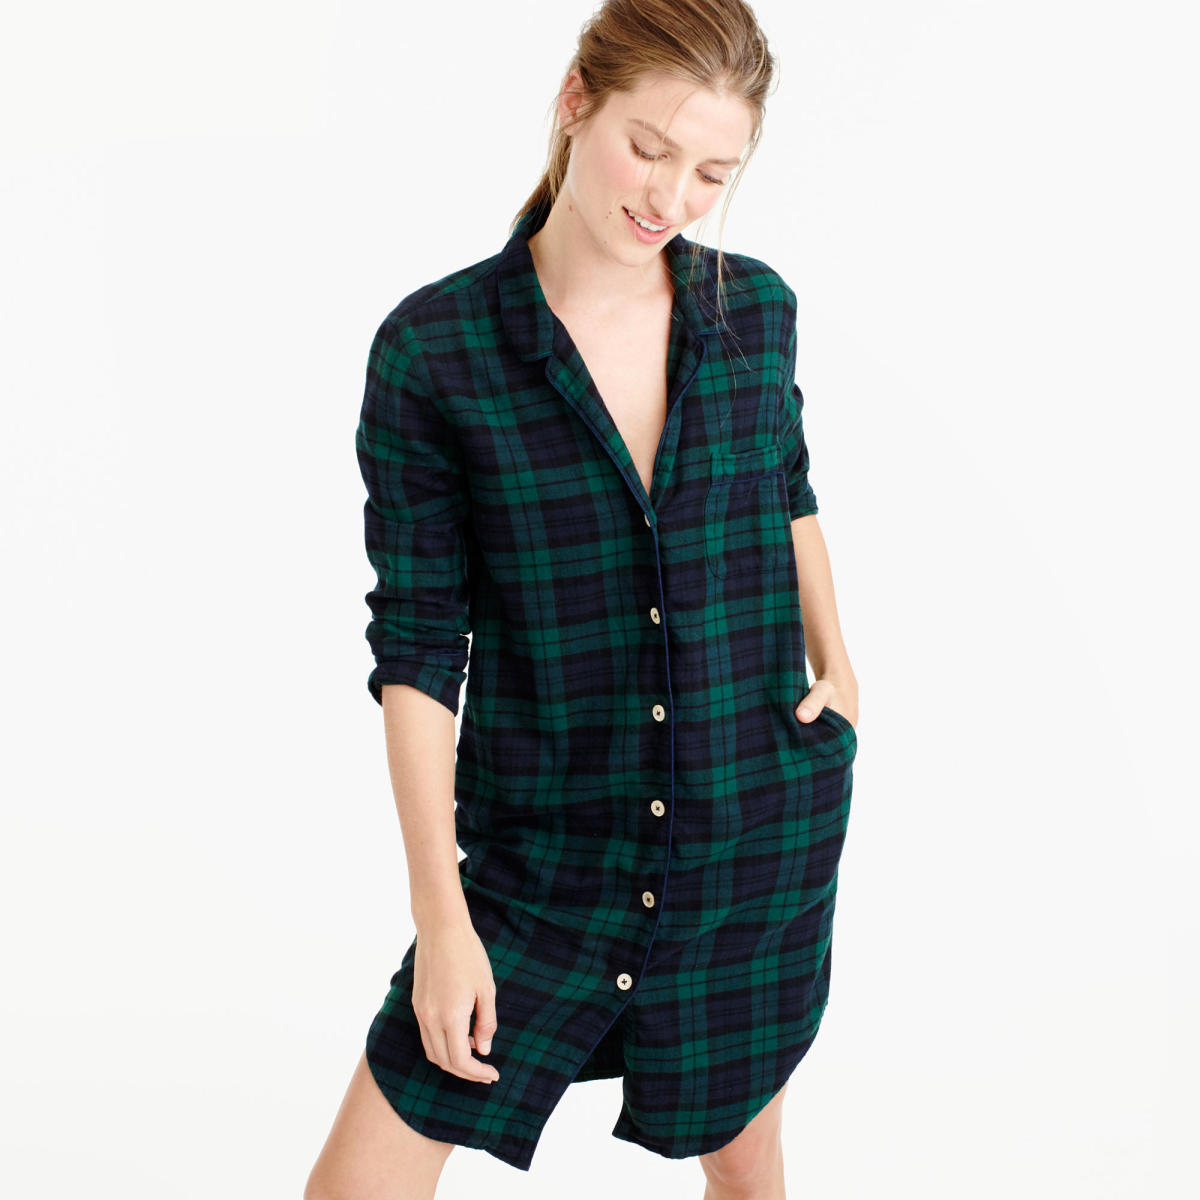 J. Crew Nightshirt in Black Watch Flannel, $68, available at J. Crew. Photo: J.Crew